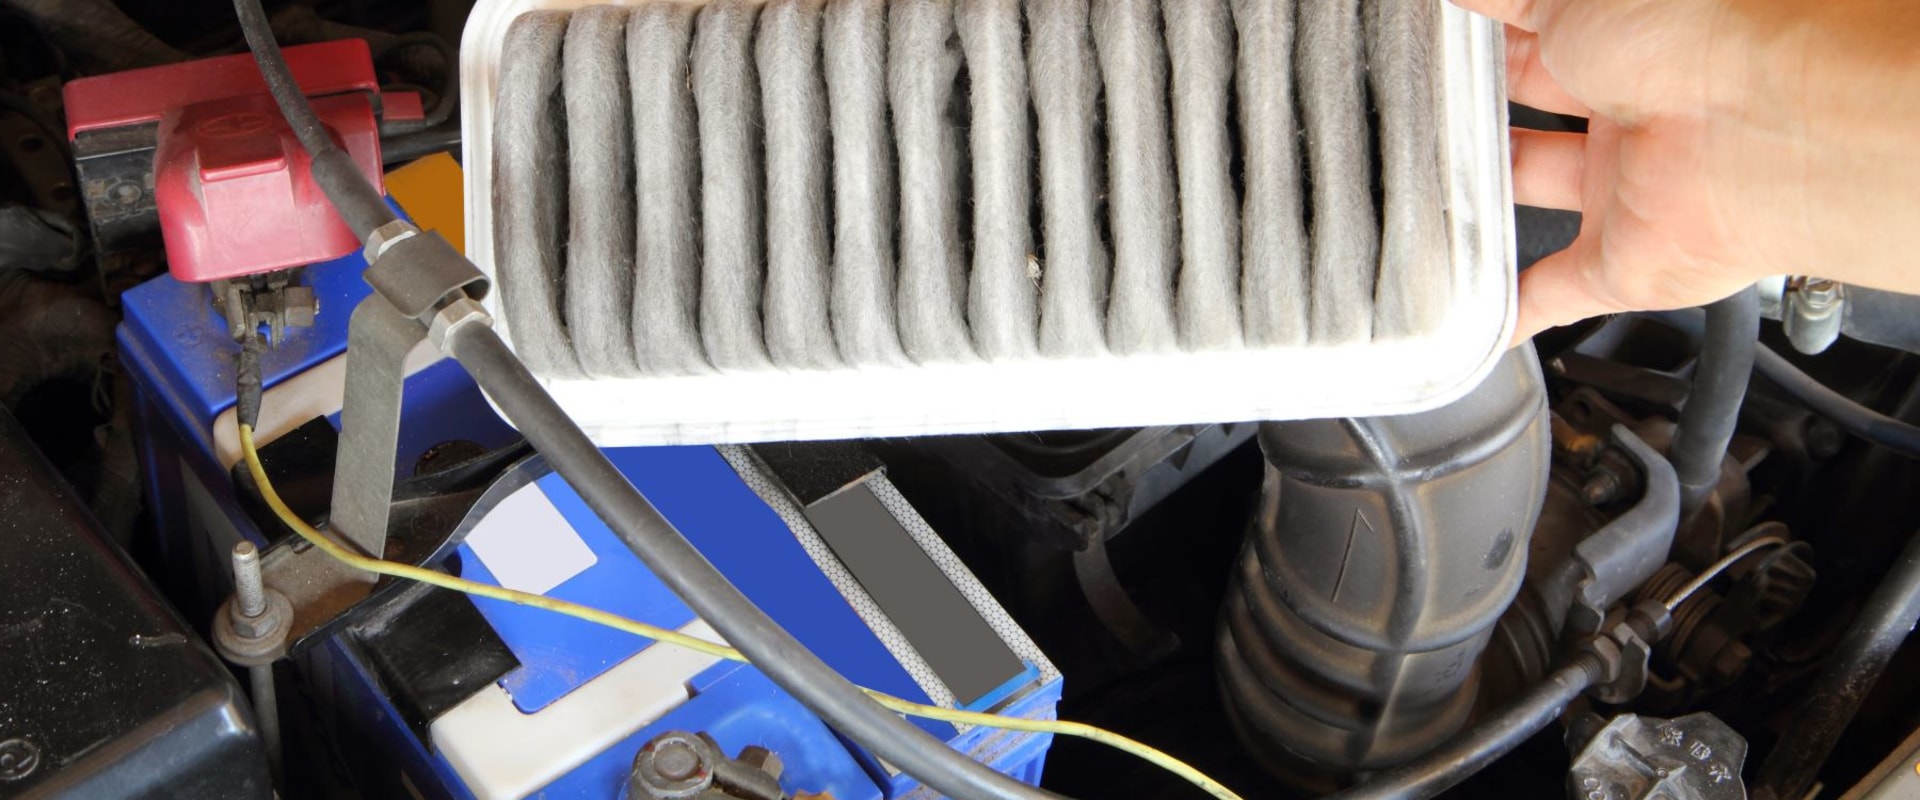 How a Dirty Air Filter Can Impact Engine Performance